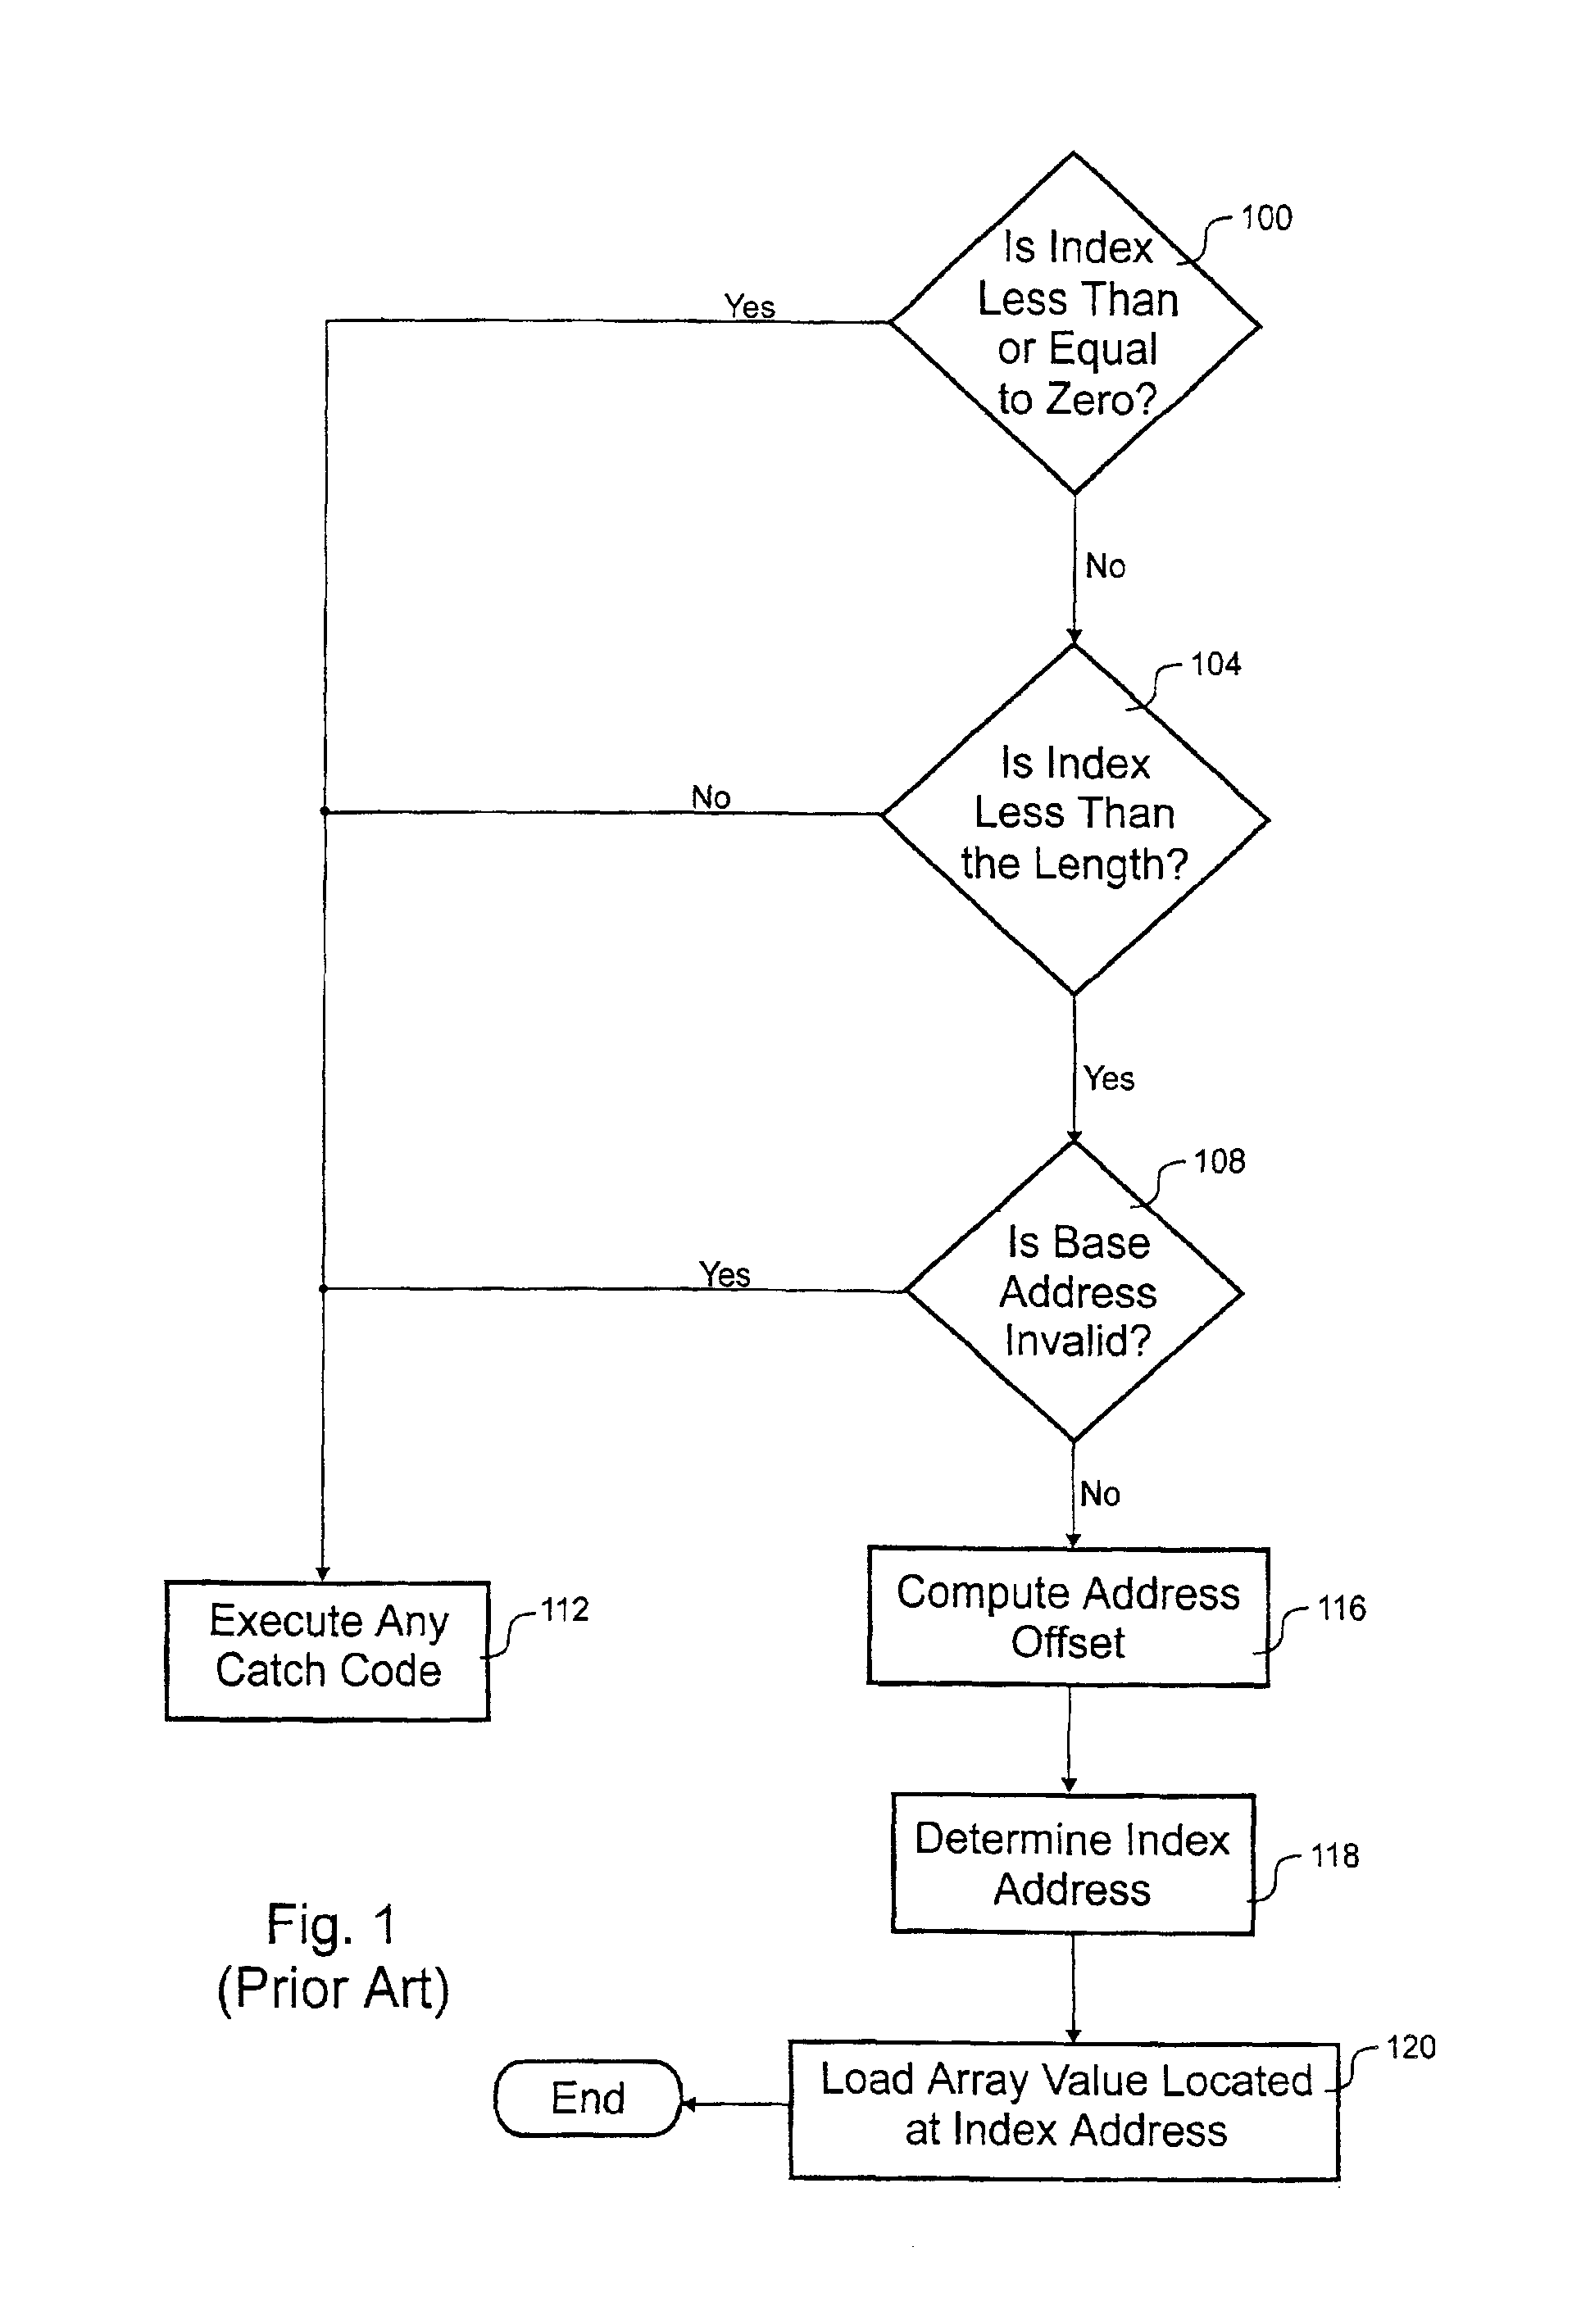 Processing architecture having an array bounds check capability